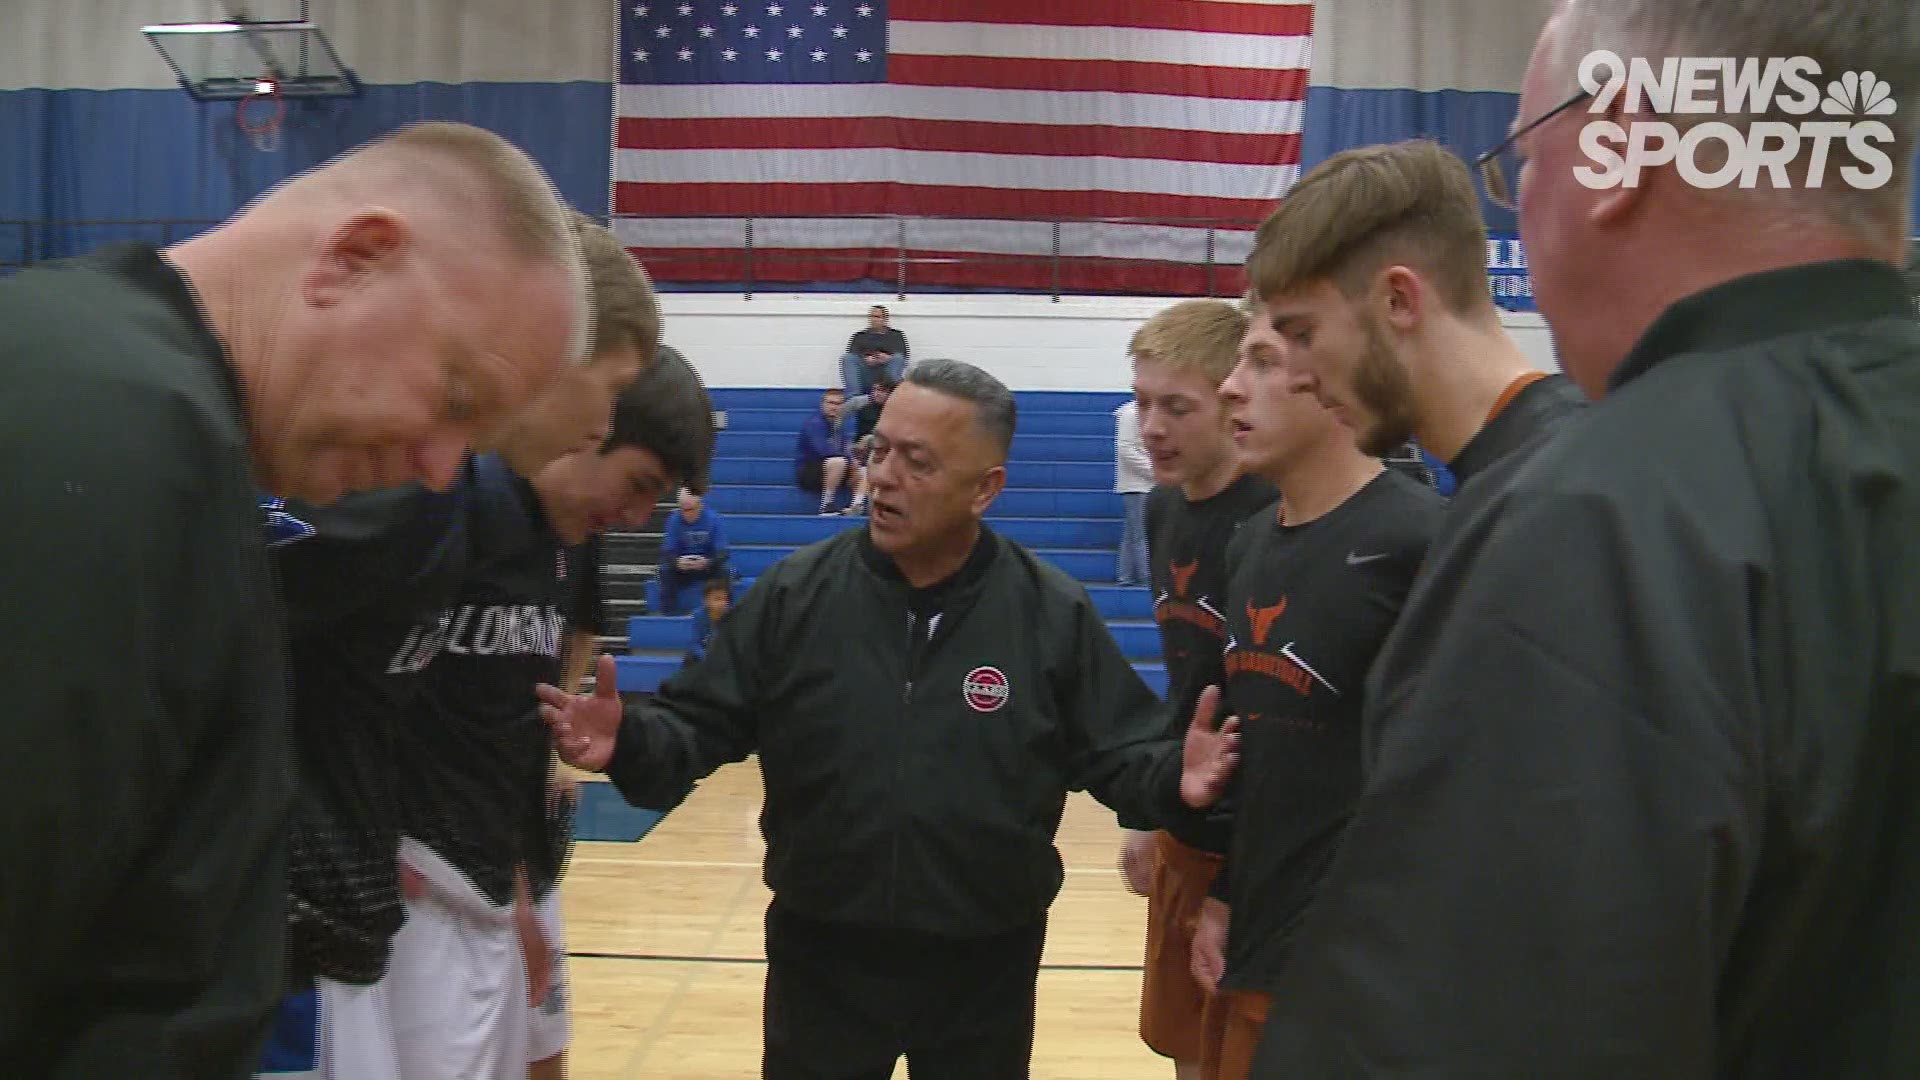 Colorado is facing a referee shortage in high school sports. A trio of veterans share why they choose to be involved.